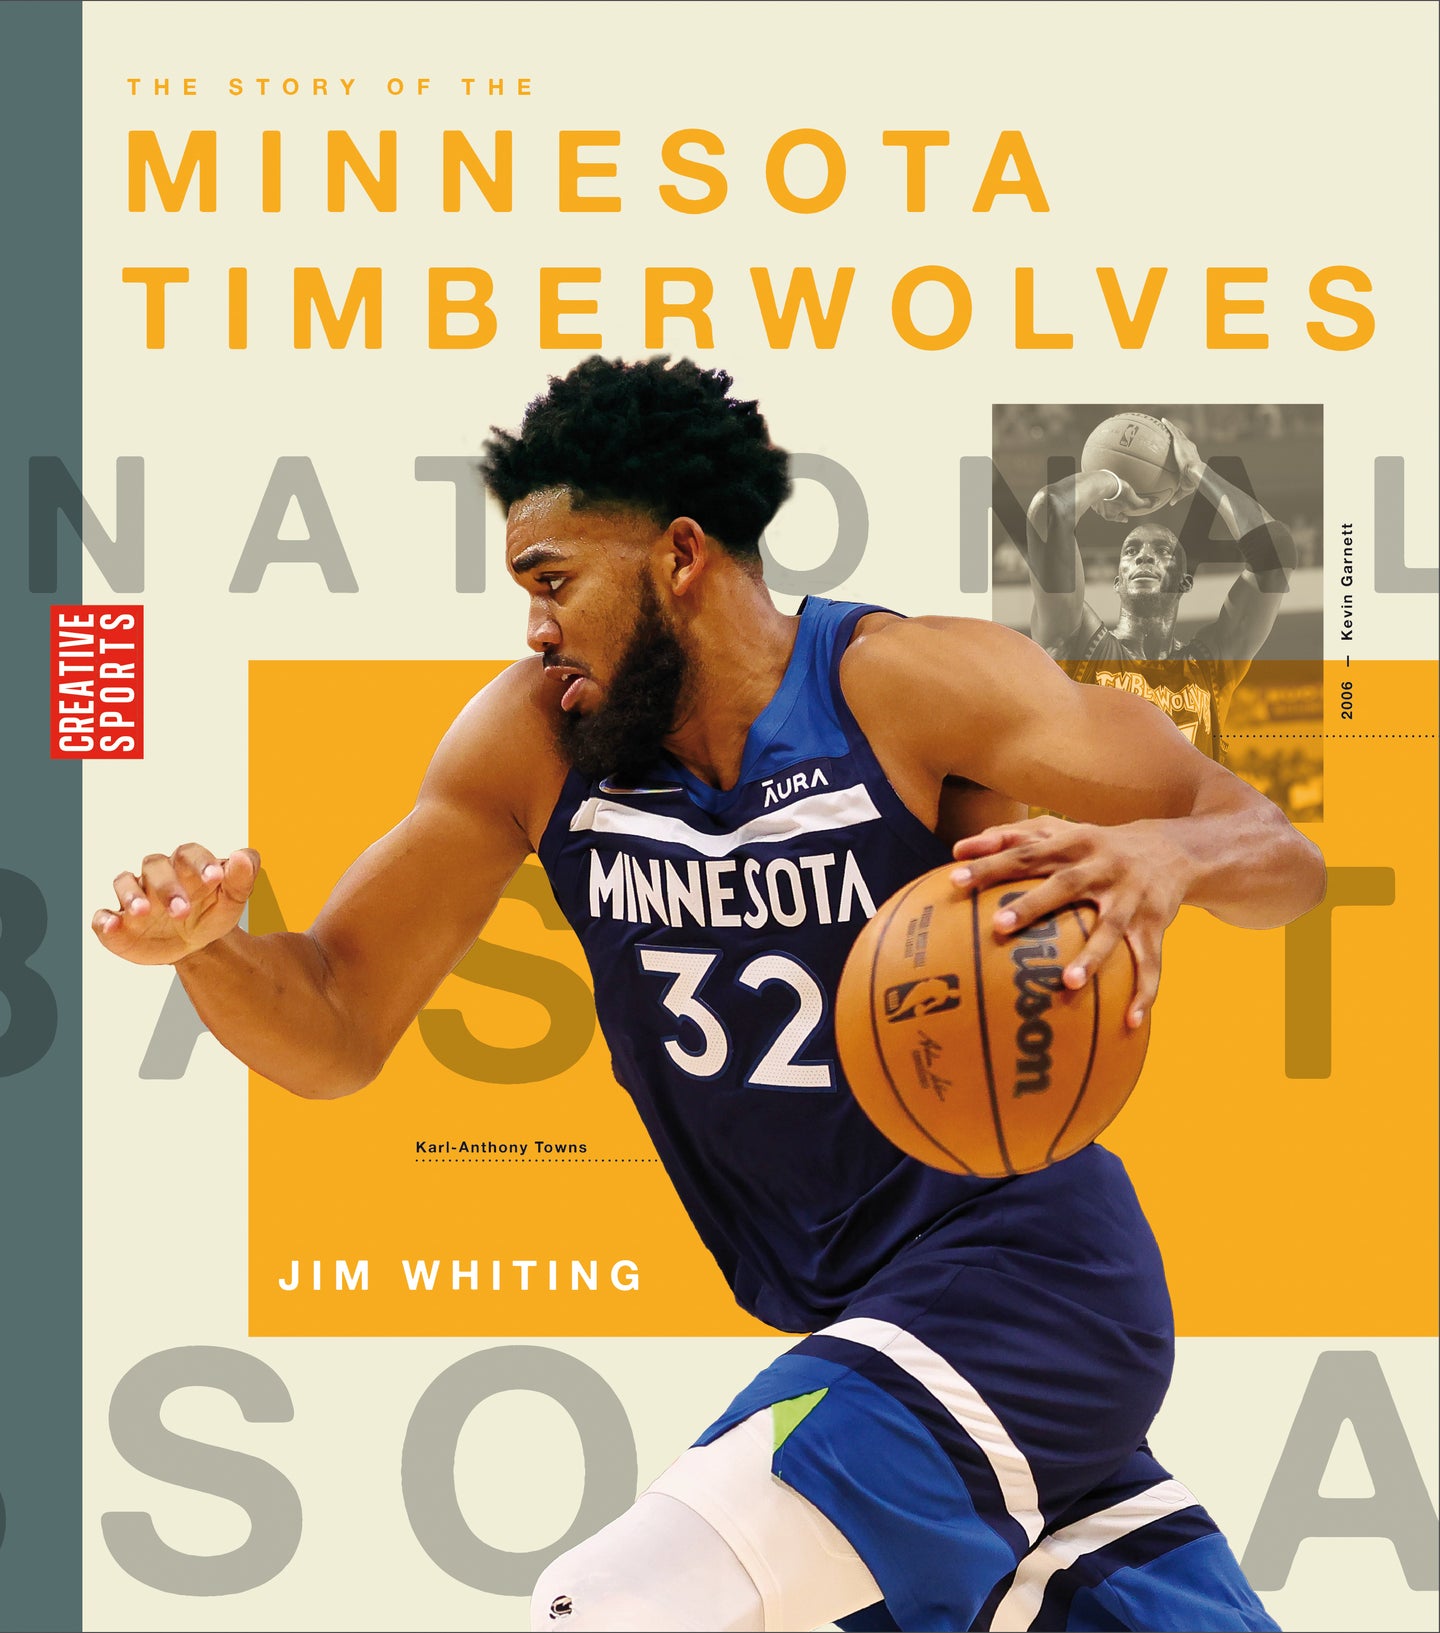 A History of Hoops (2023): The Story of the Minnesota Timberwolves